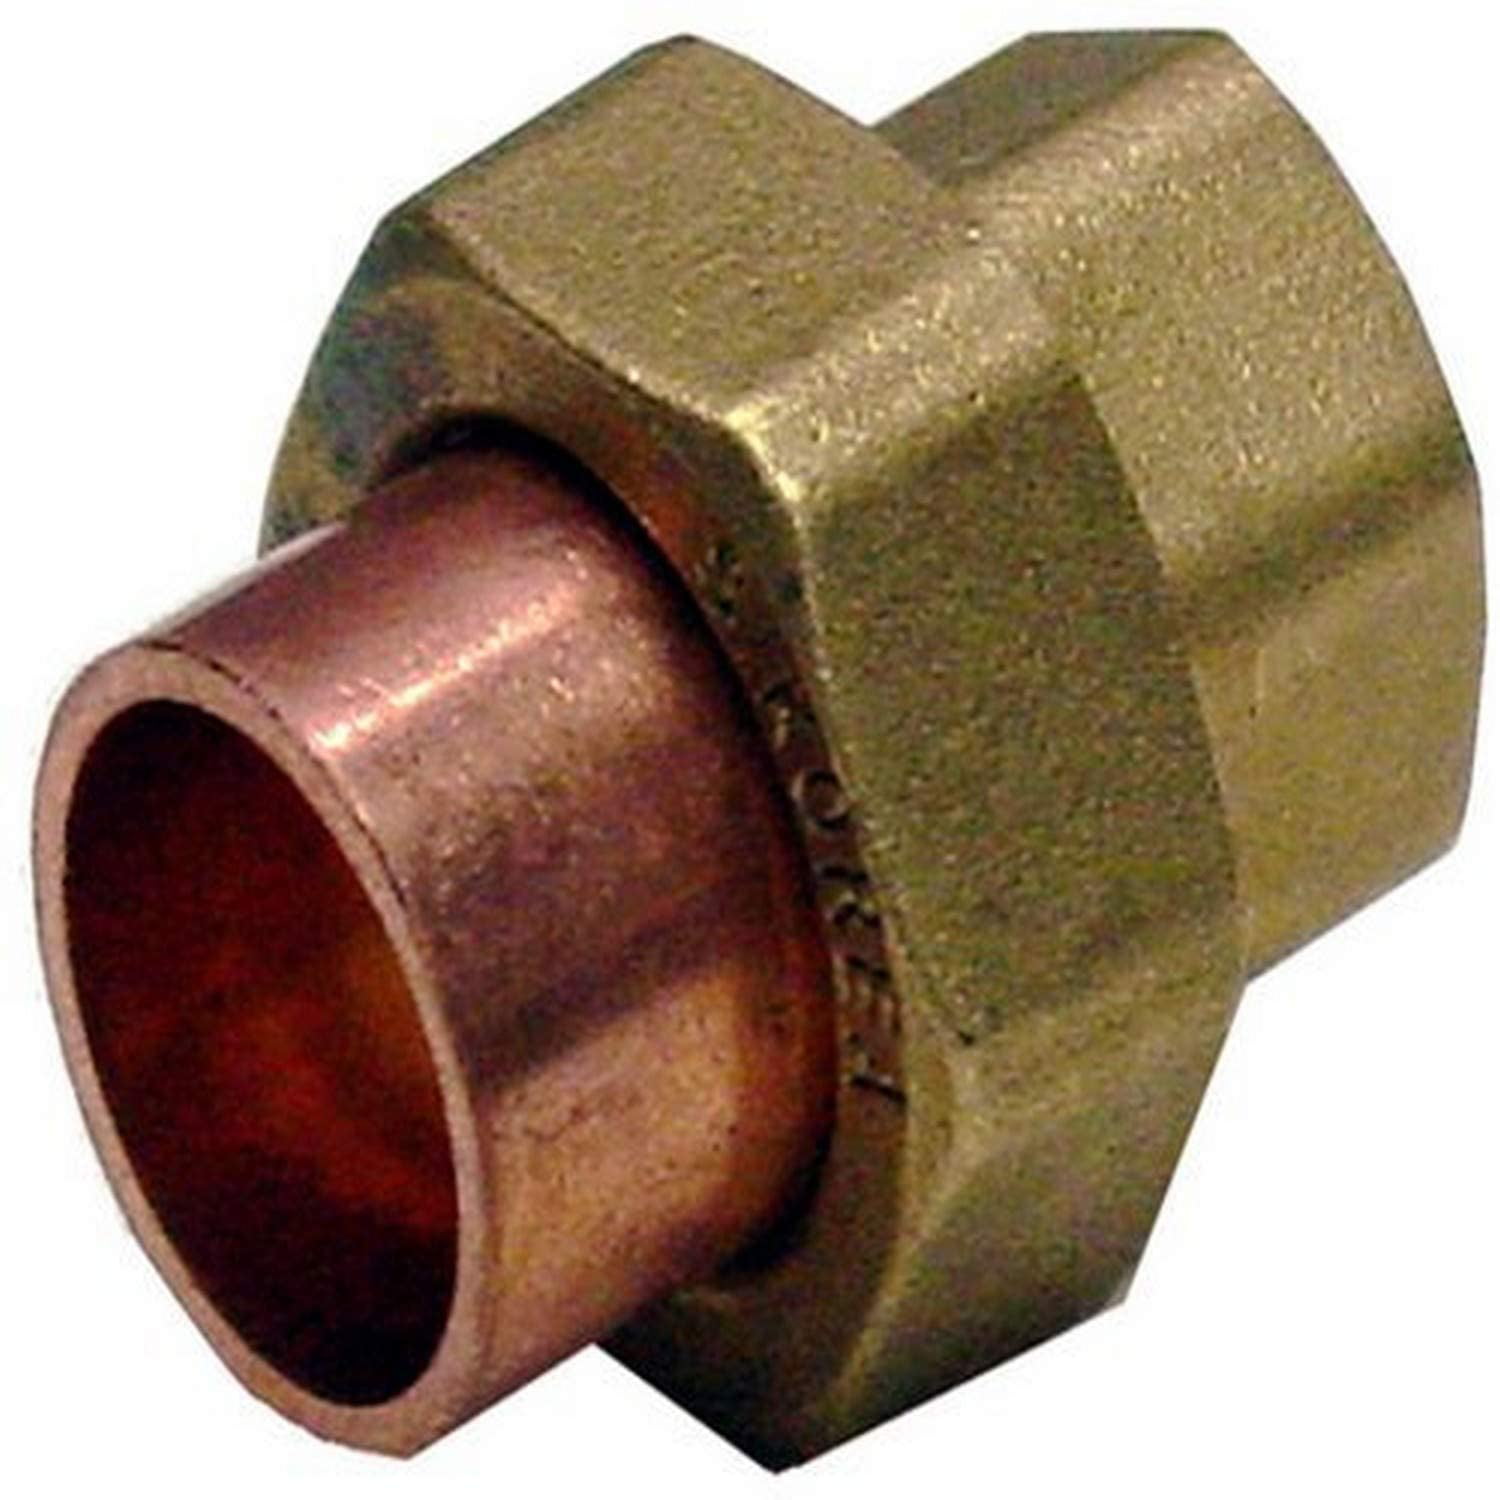 Plumbers Choice 92301 1/4-Inch C x C Copper Fitting Union 